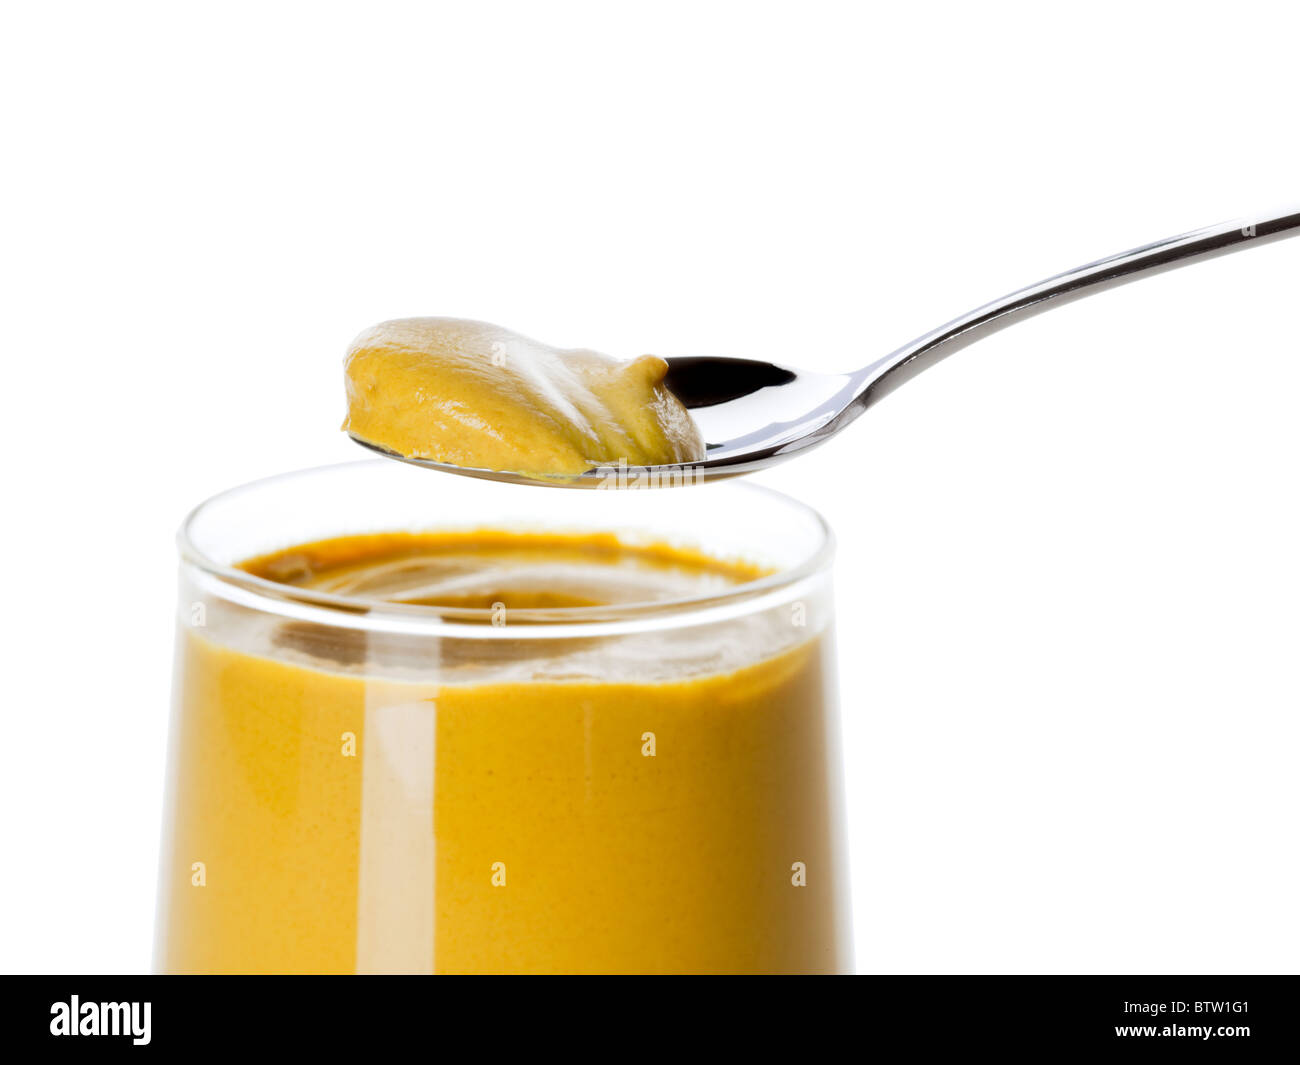 taking a spoonful of mustard from the glass Stock Photo